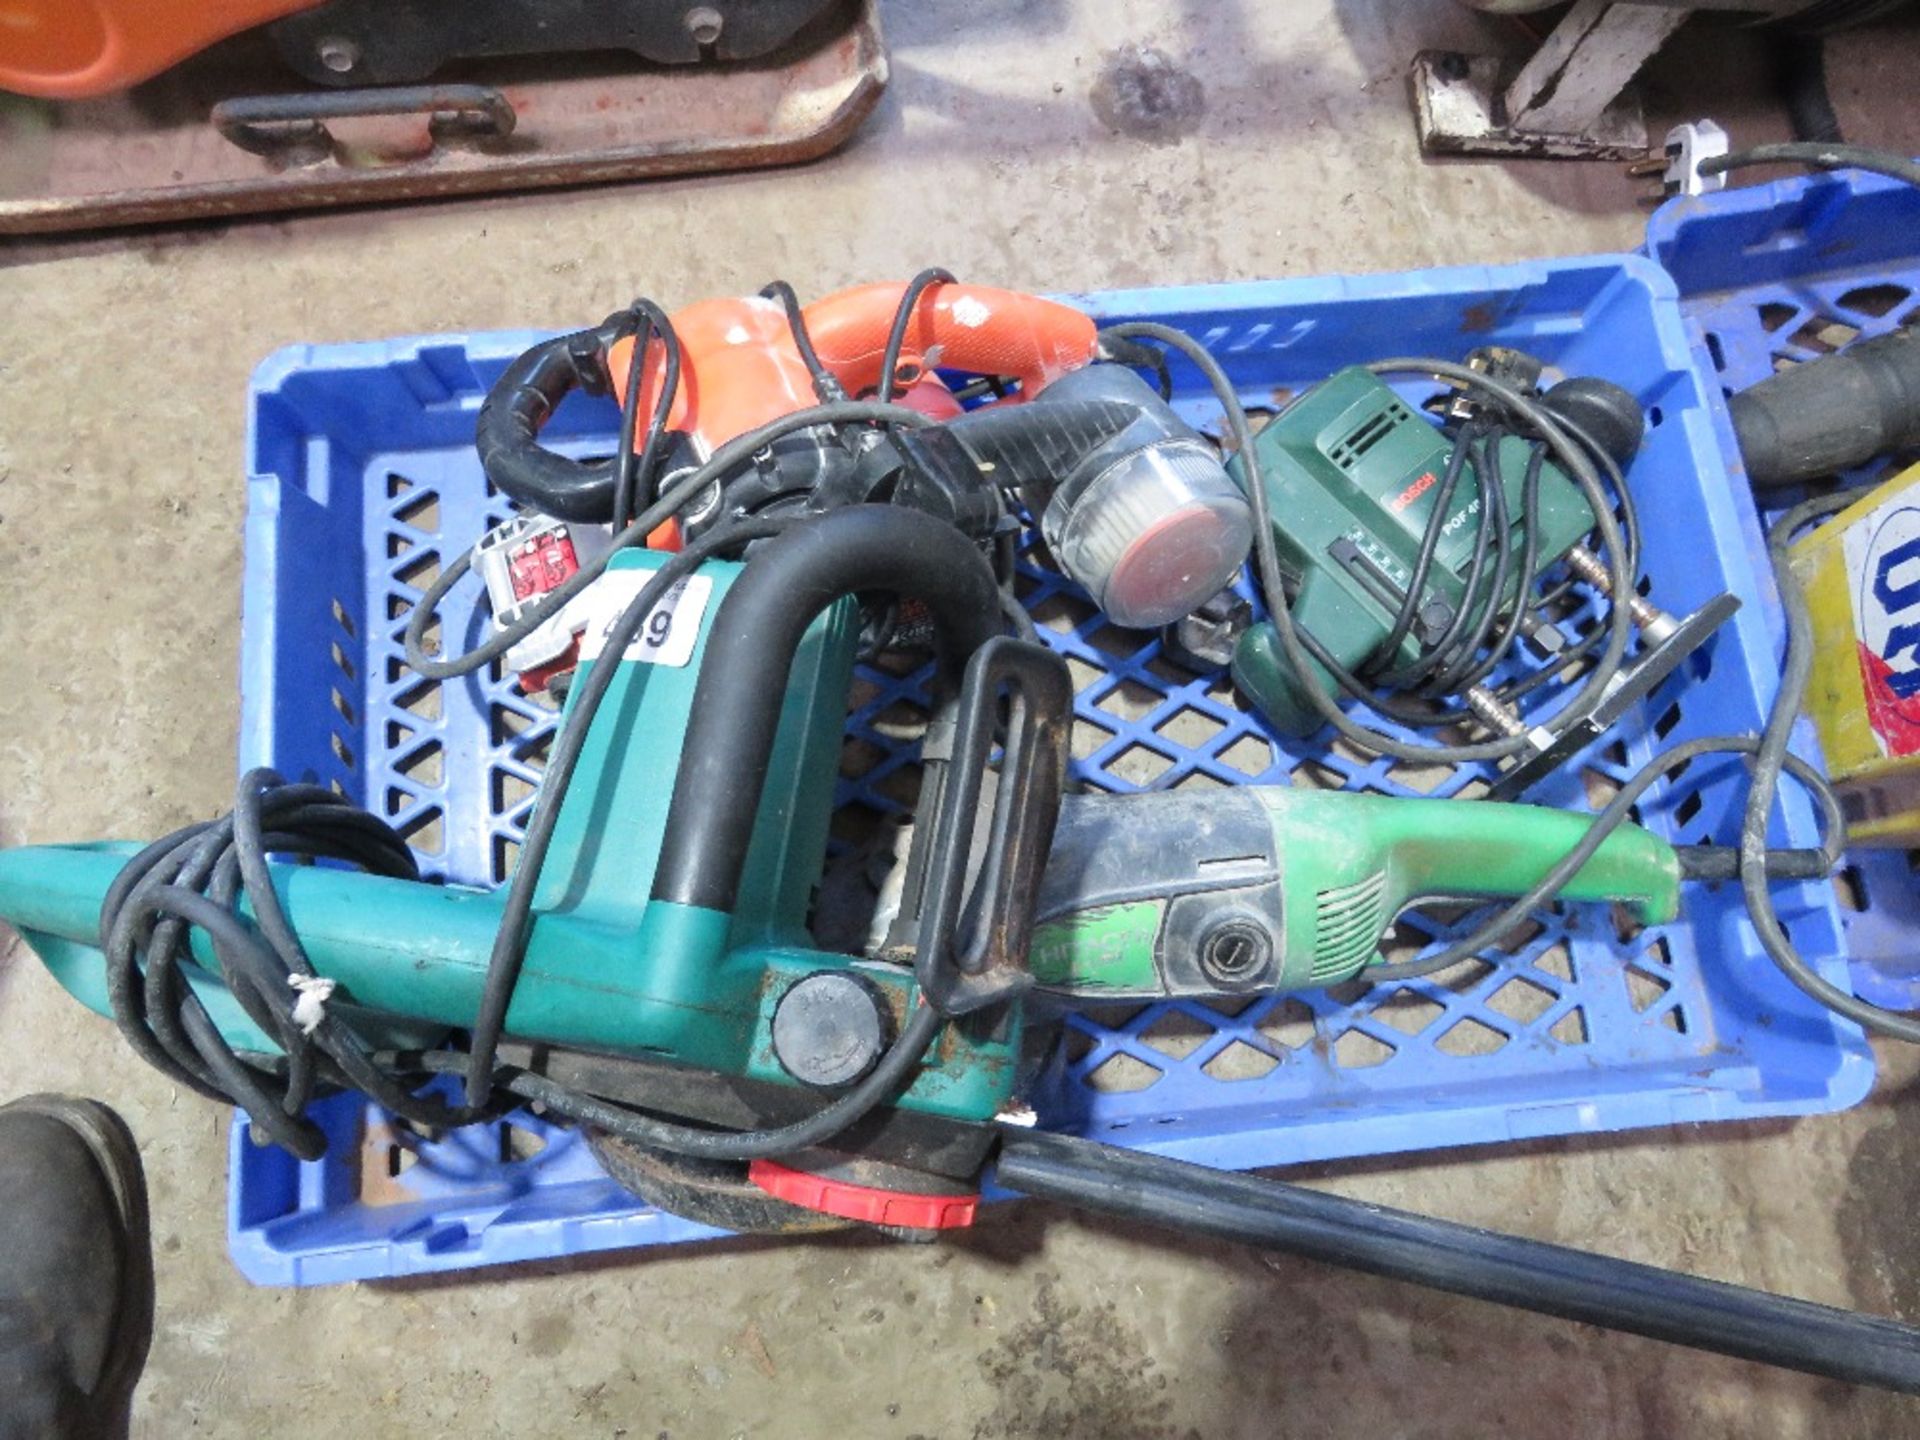 4 X ASSORTED 240VOLT POWER TOOLS: SANDER, GRINDER, ROUTER, CHAINSAW. THIS LOT IS SOLD UNDER THE A